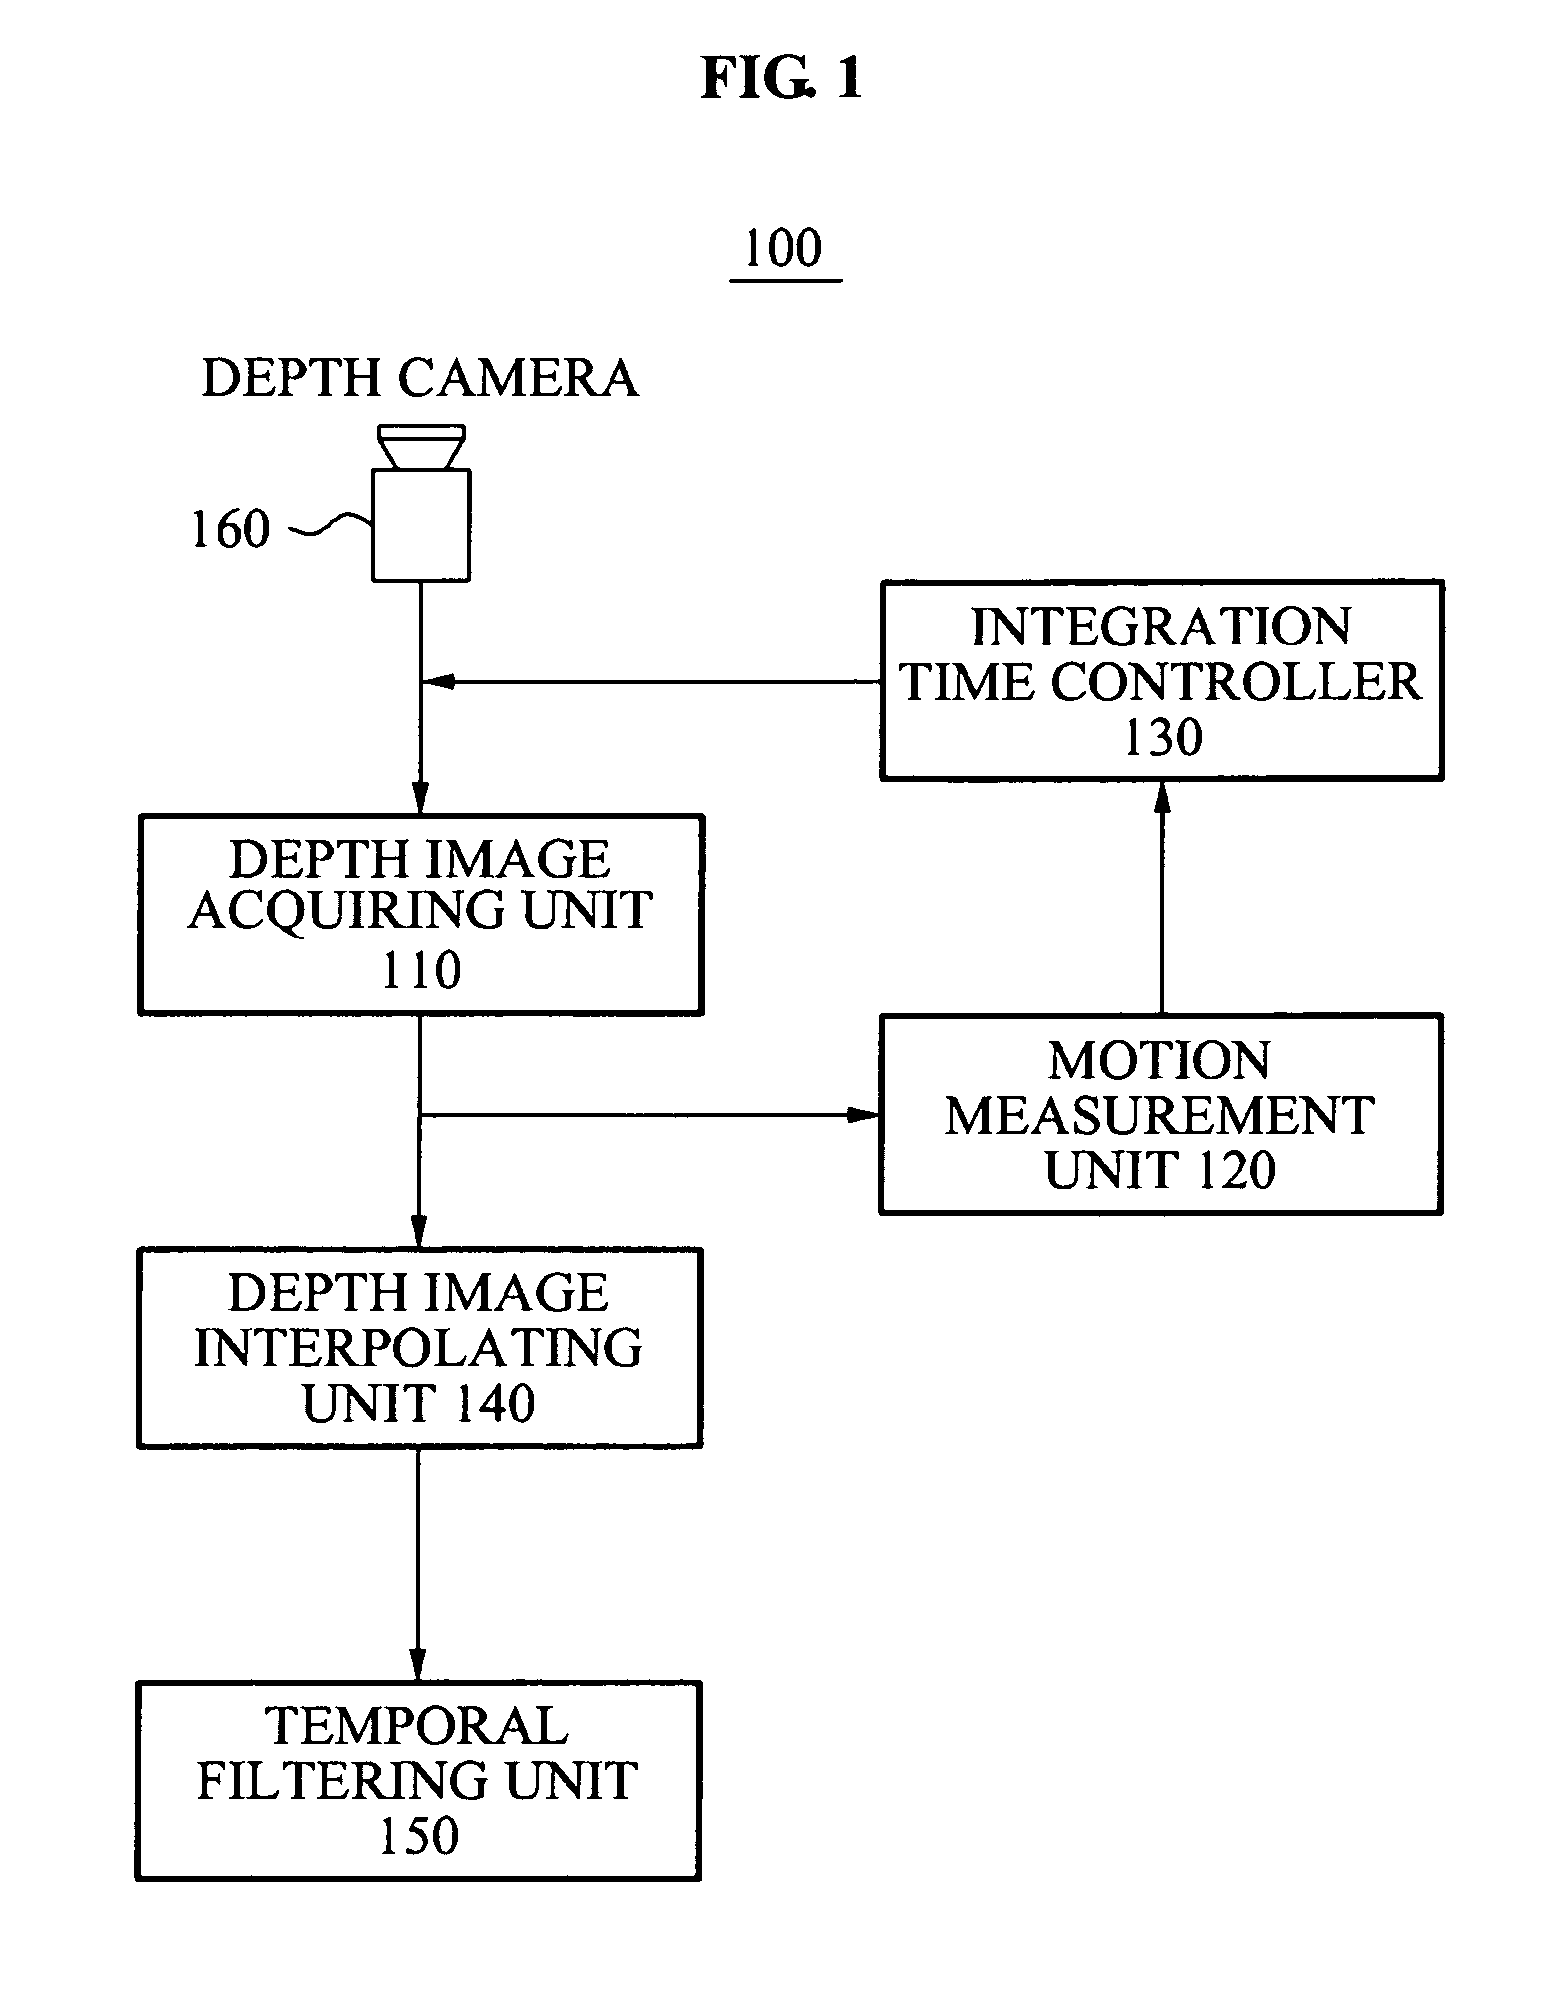 Apparatus and method for dynamically controlling integration time of depth camera for accuracy improvement